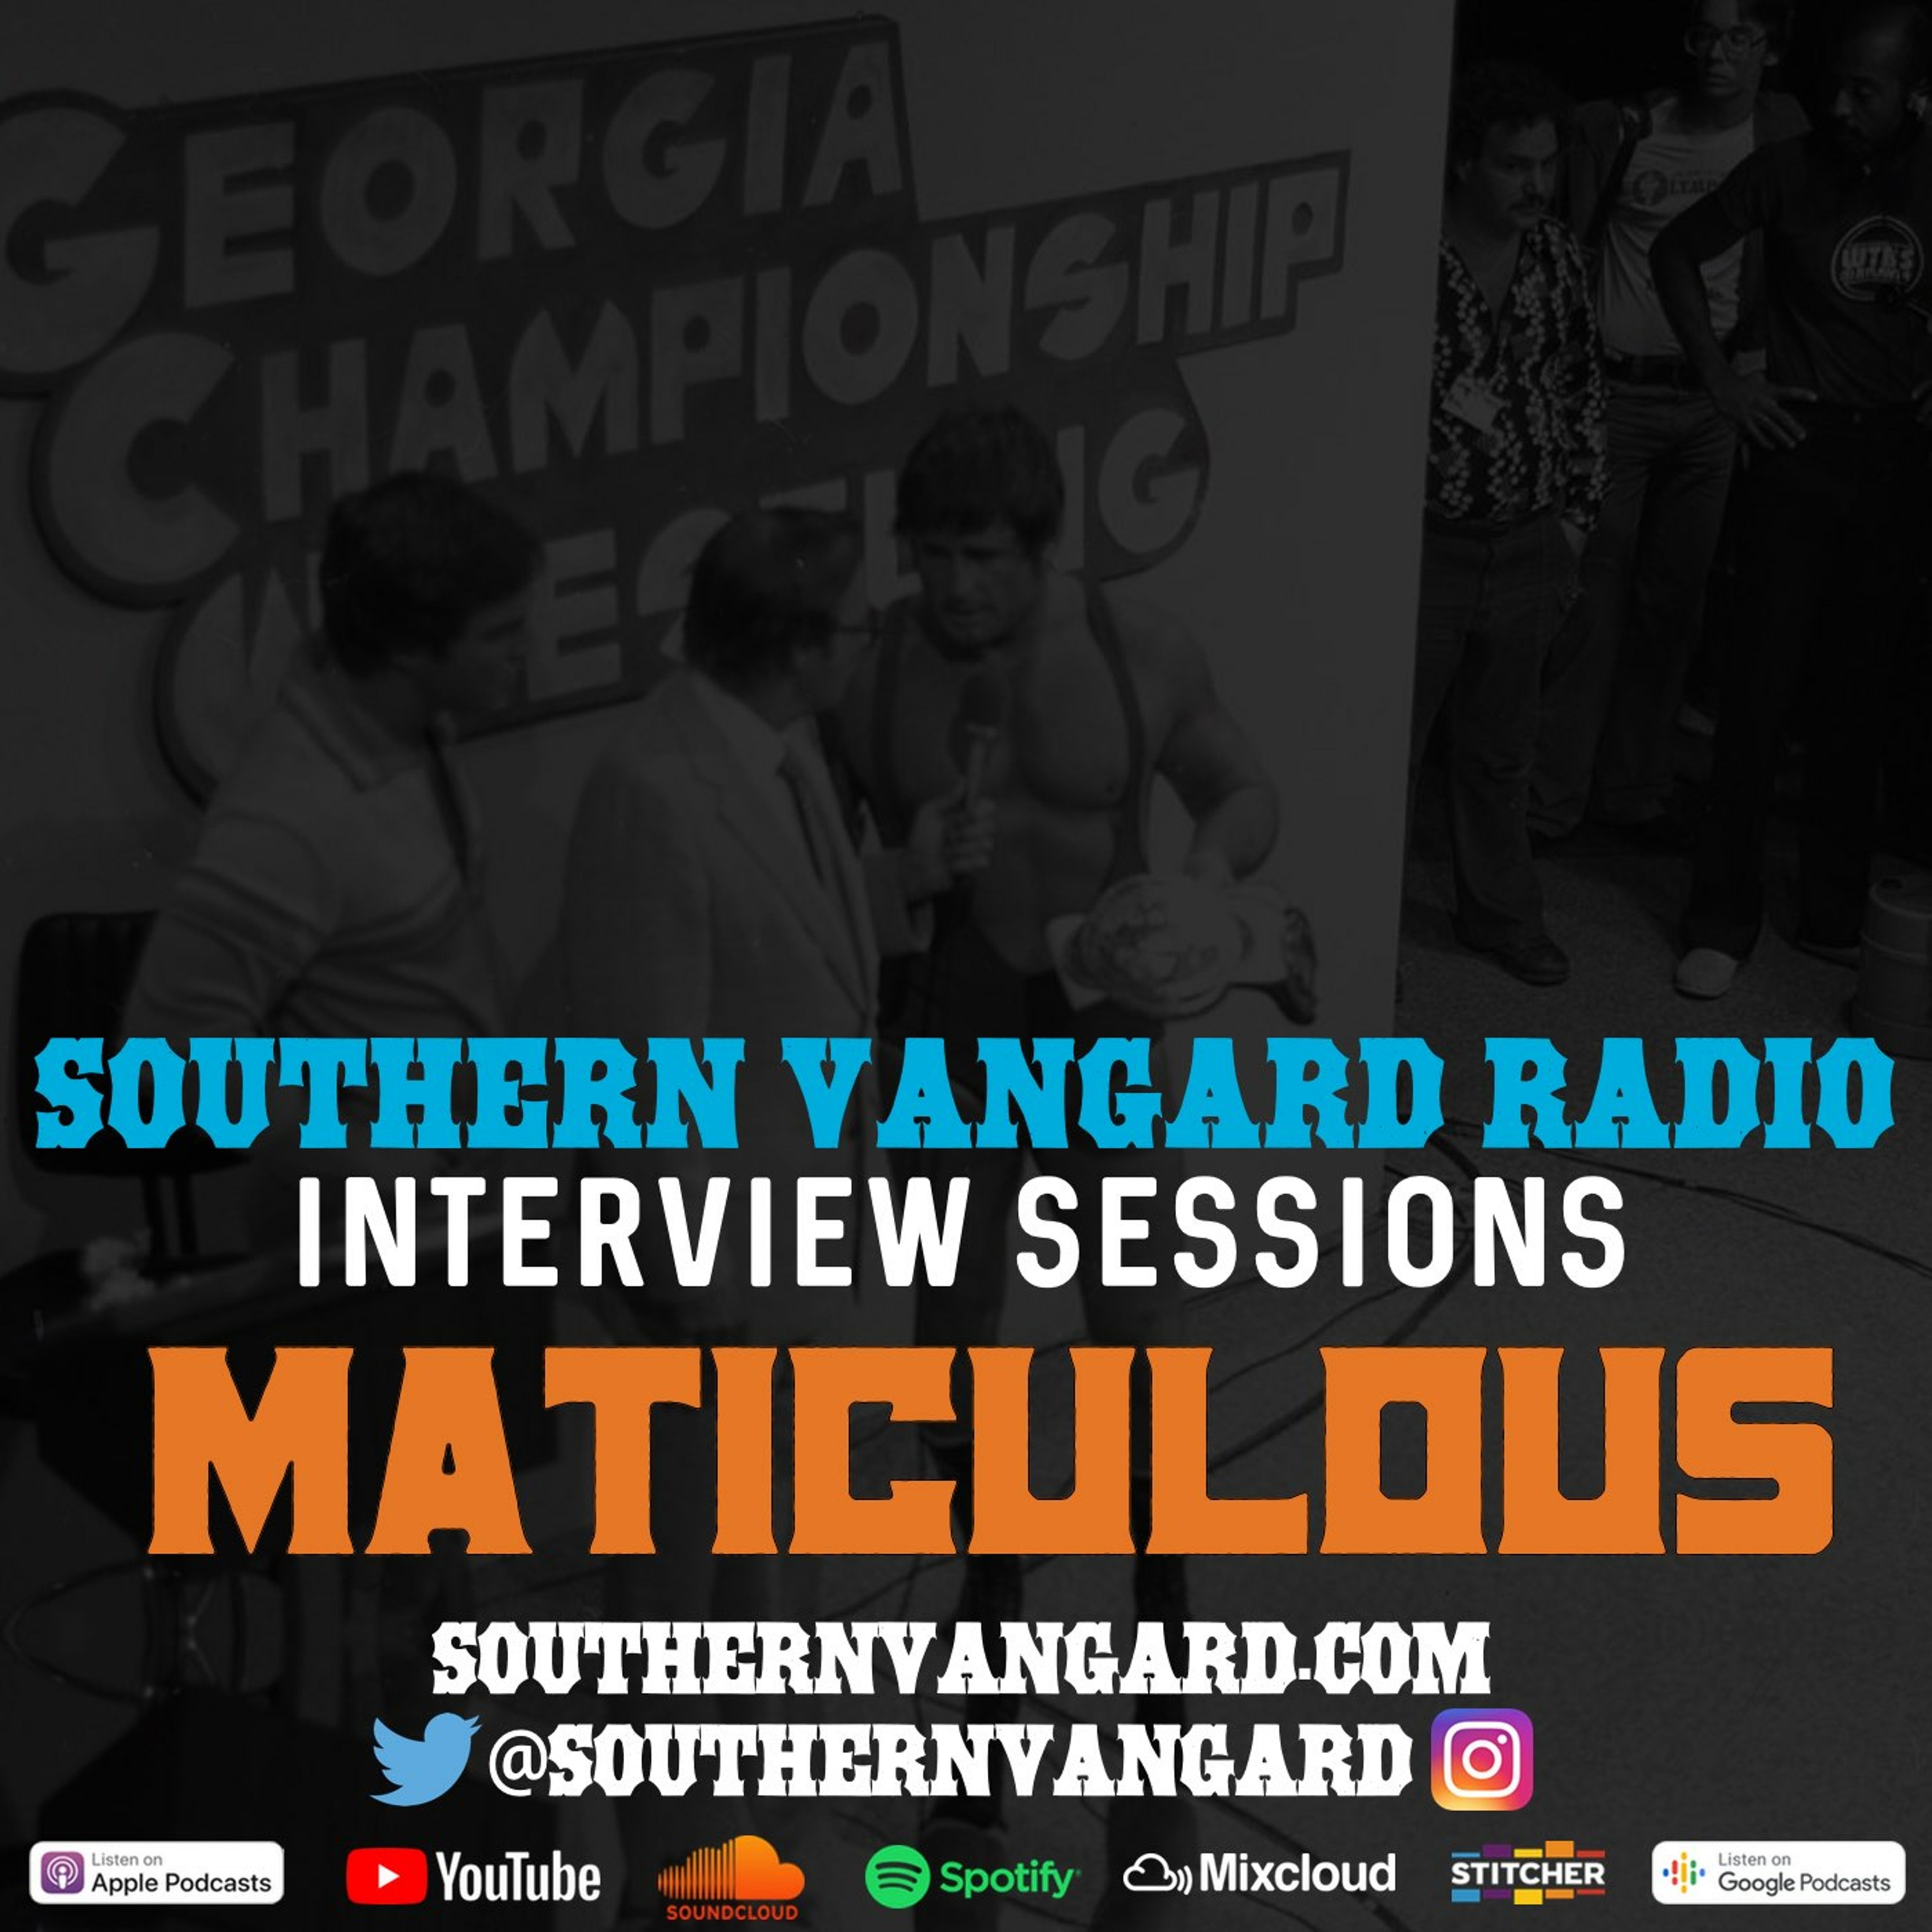 maticulous - Southern Vangard Radio Interview Sessions